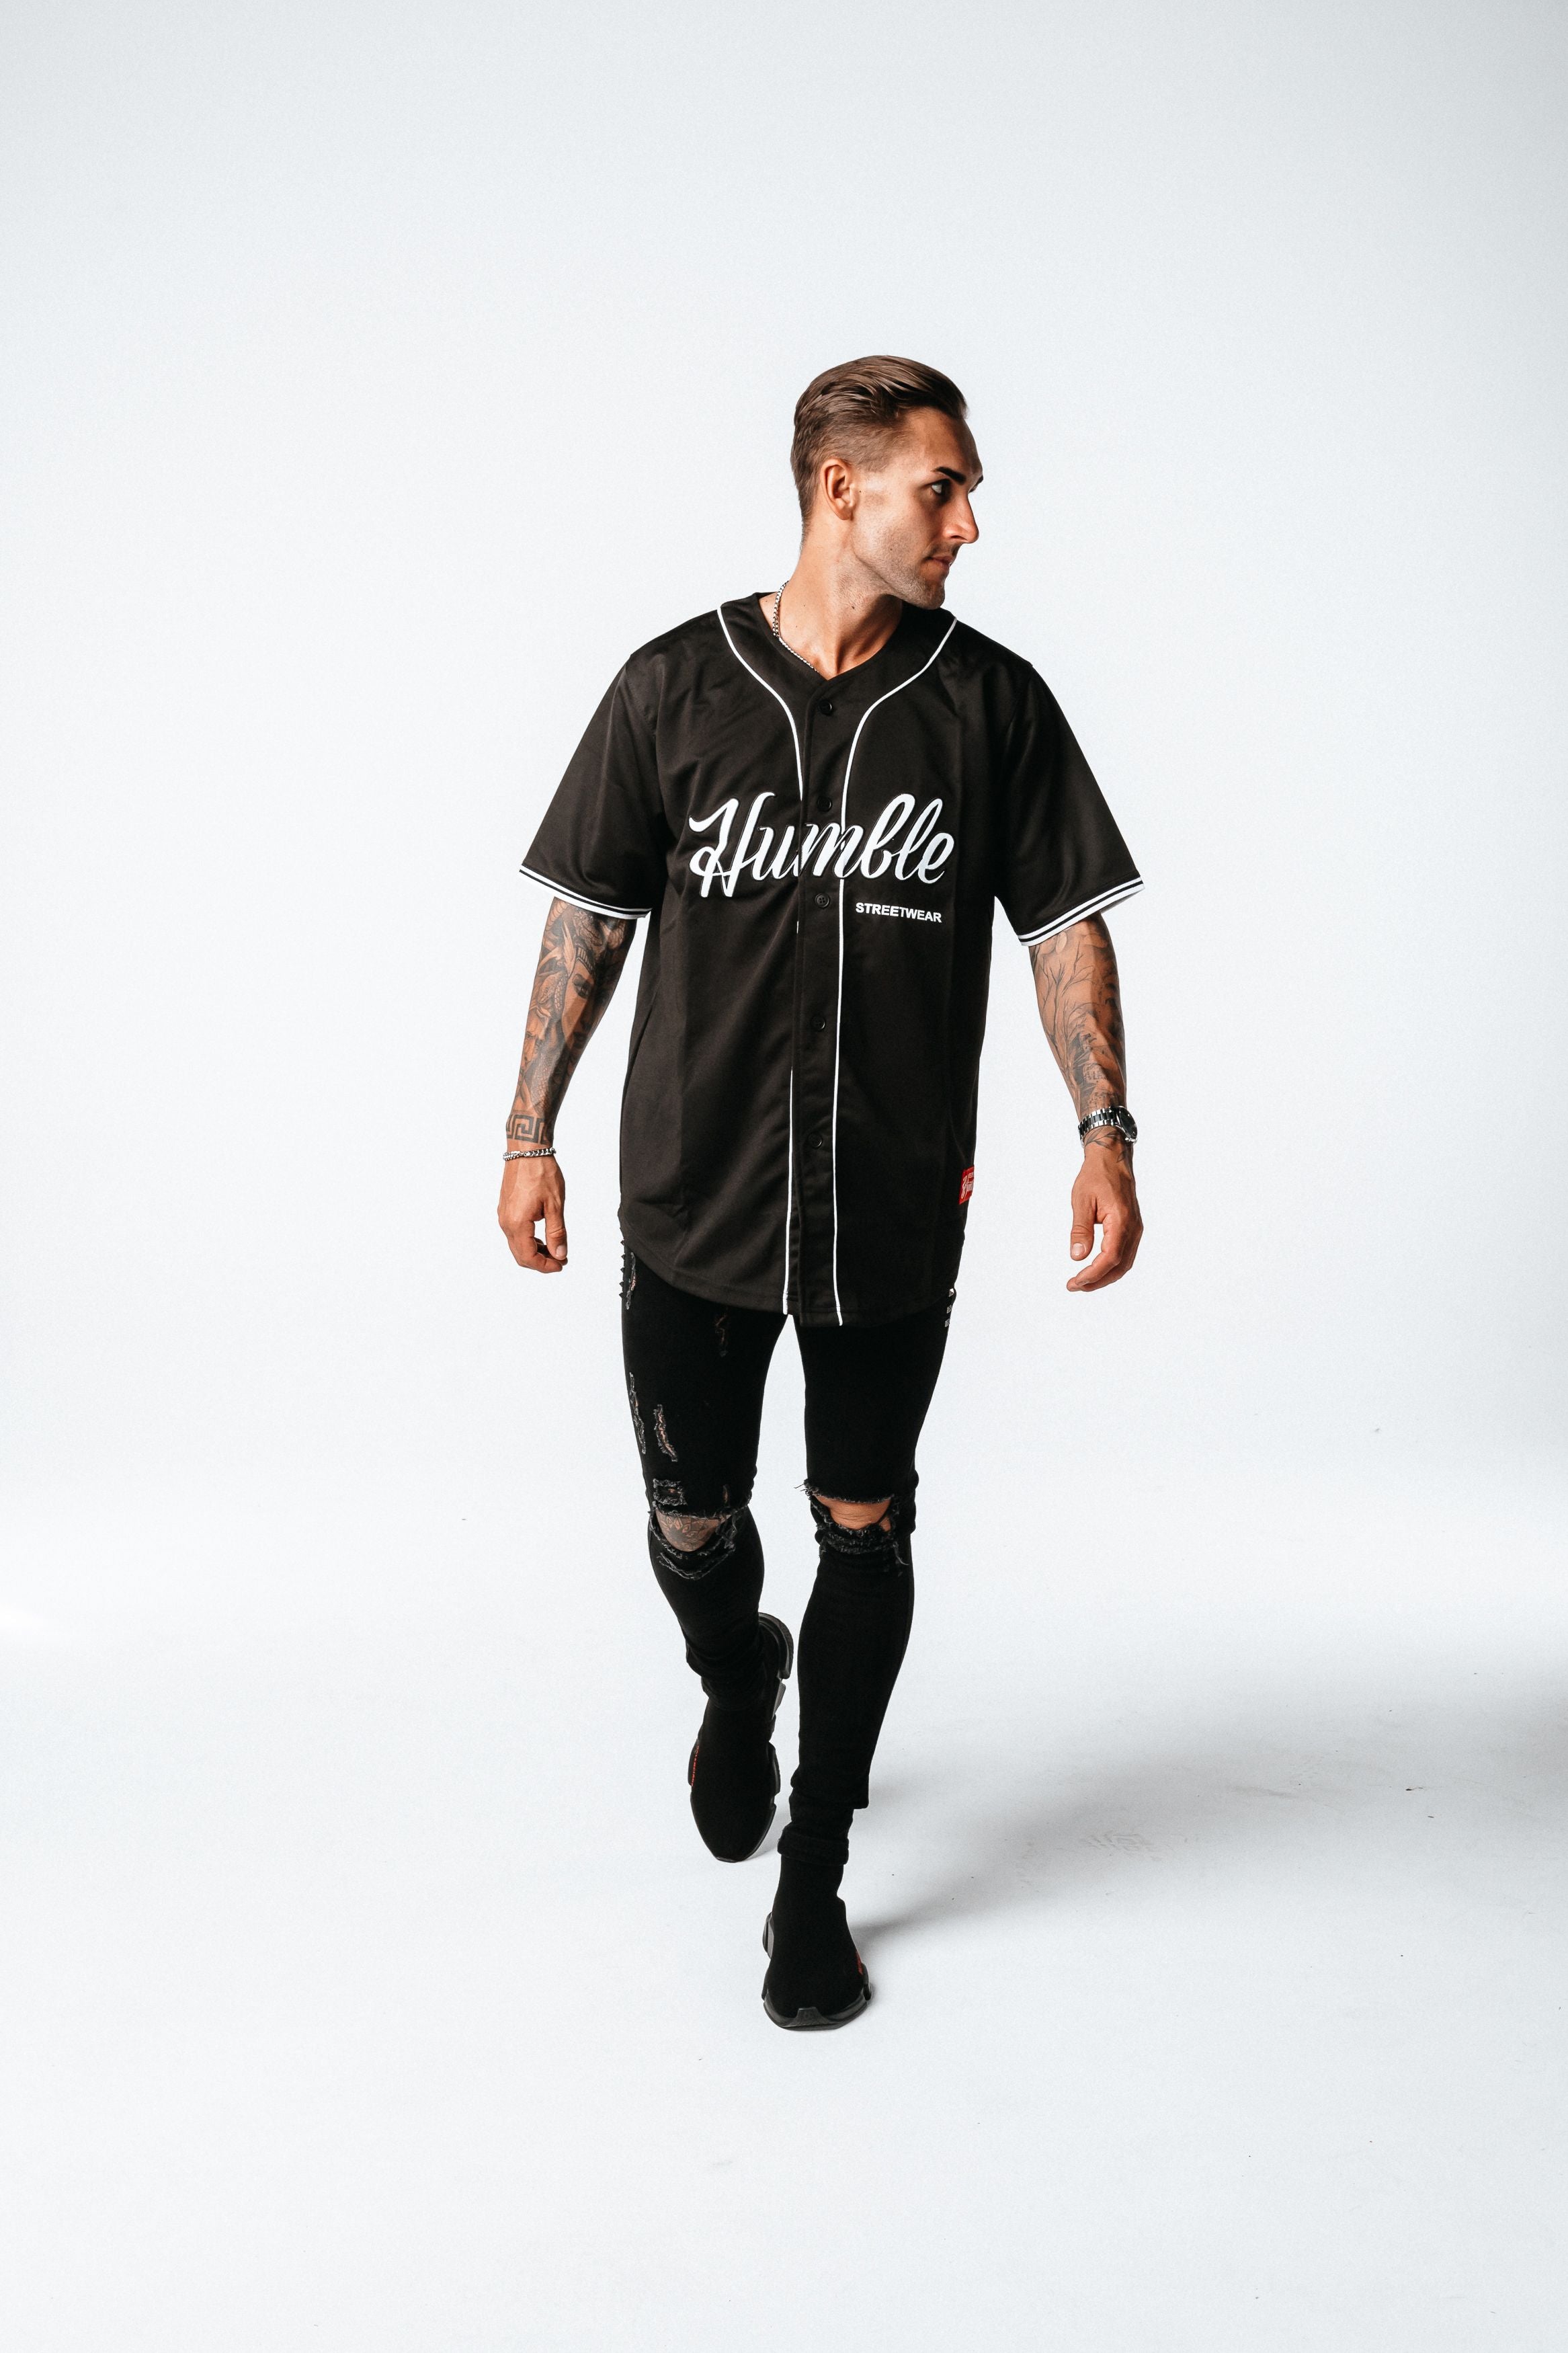 The Humble Baseball Jersey Is Still Perfect for Summer Style